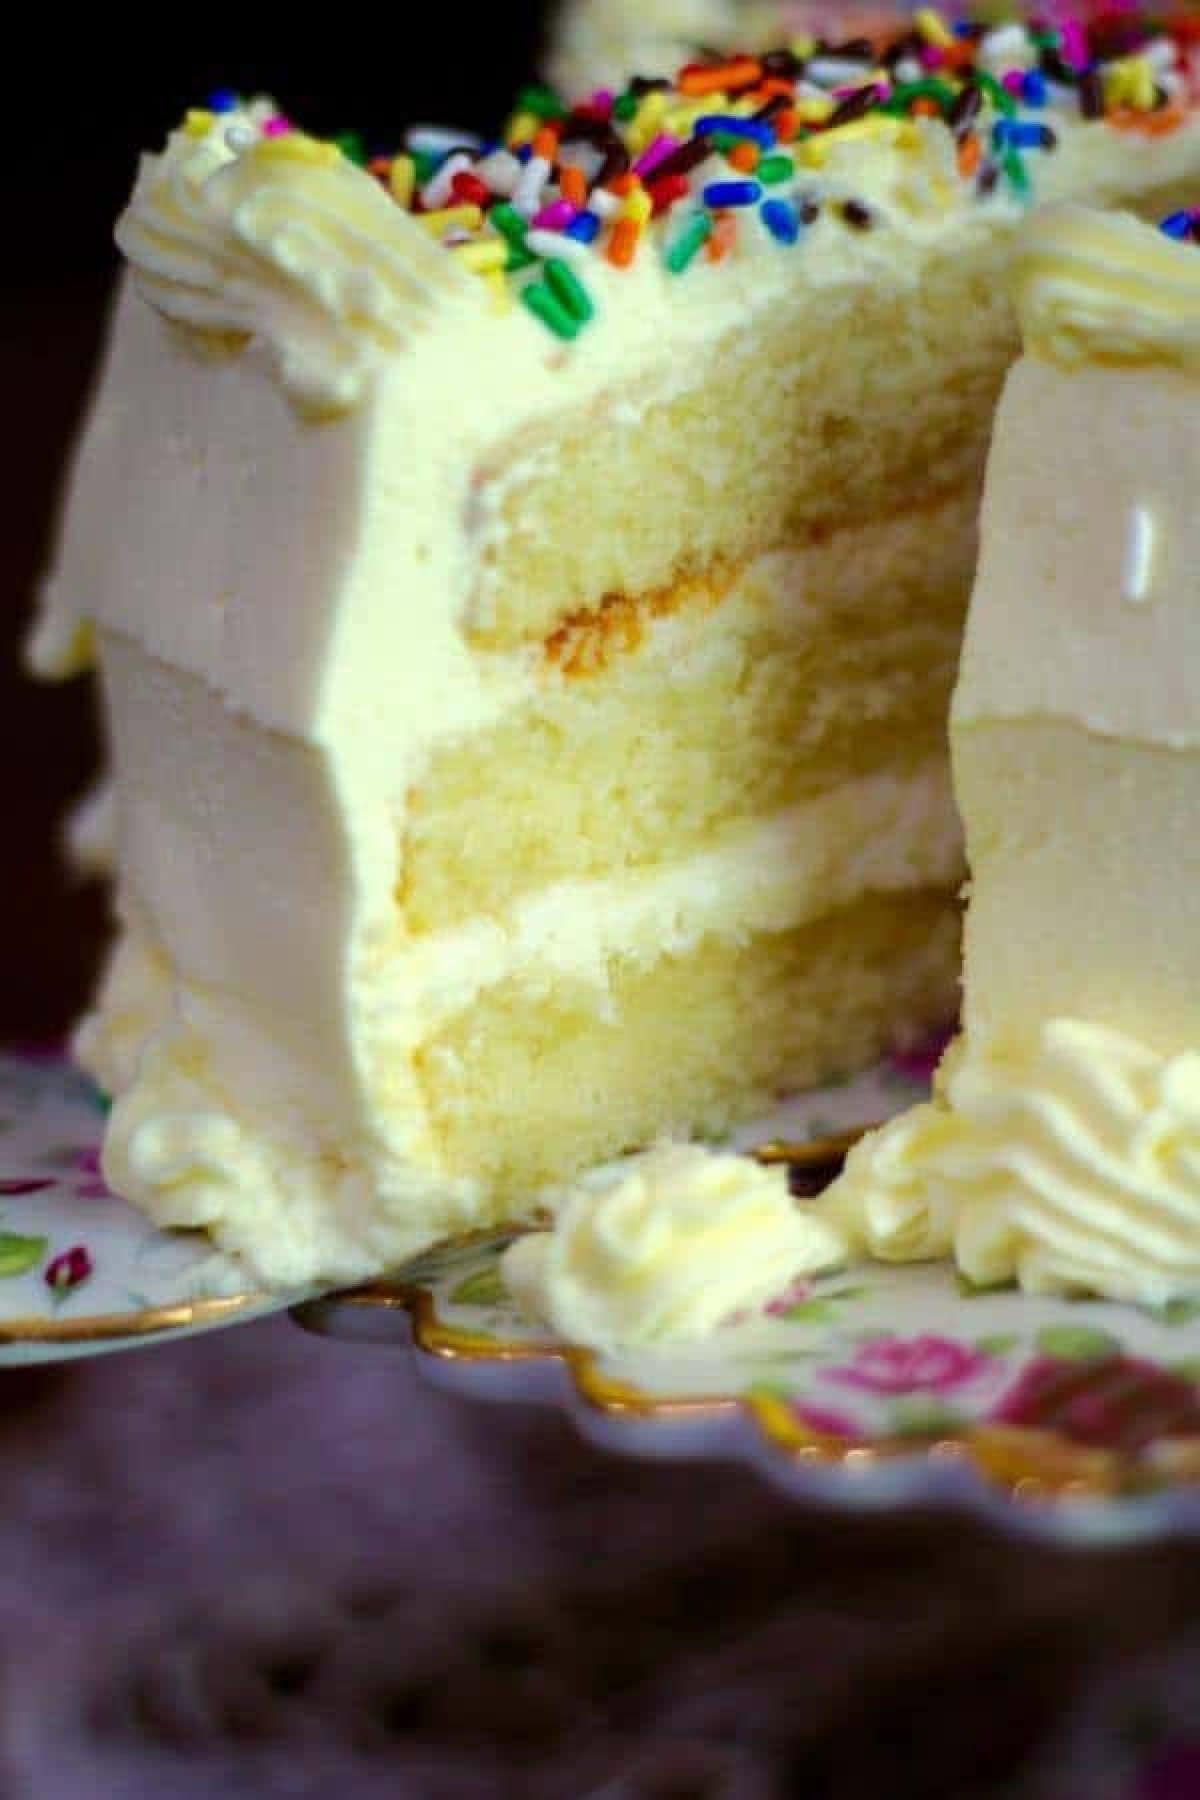 Closeup of a slice of cake being removed from the cake plate.